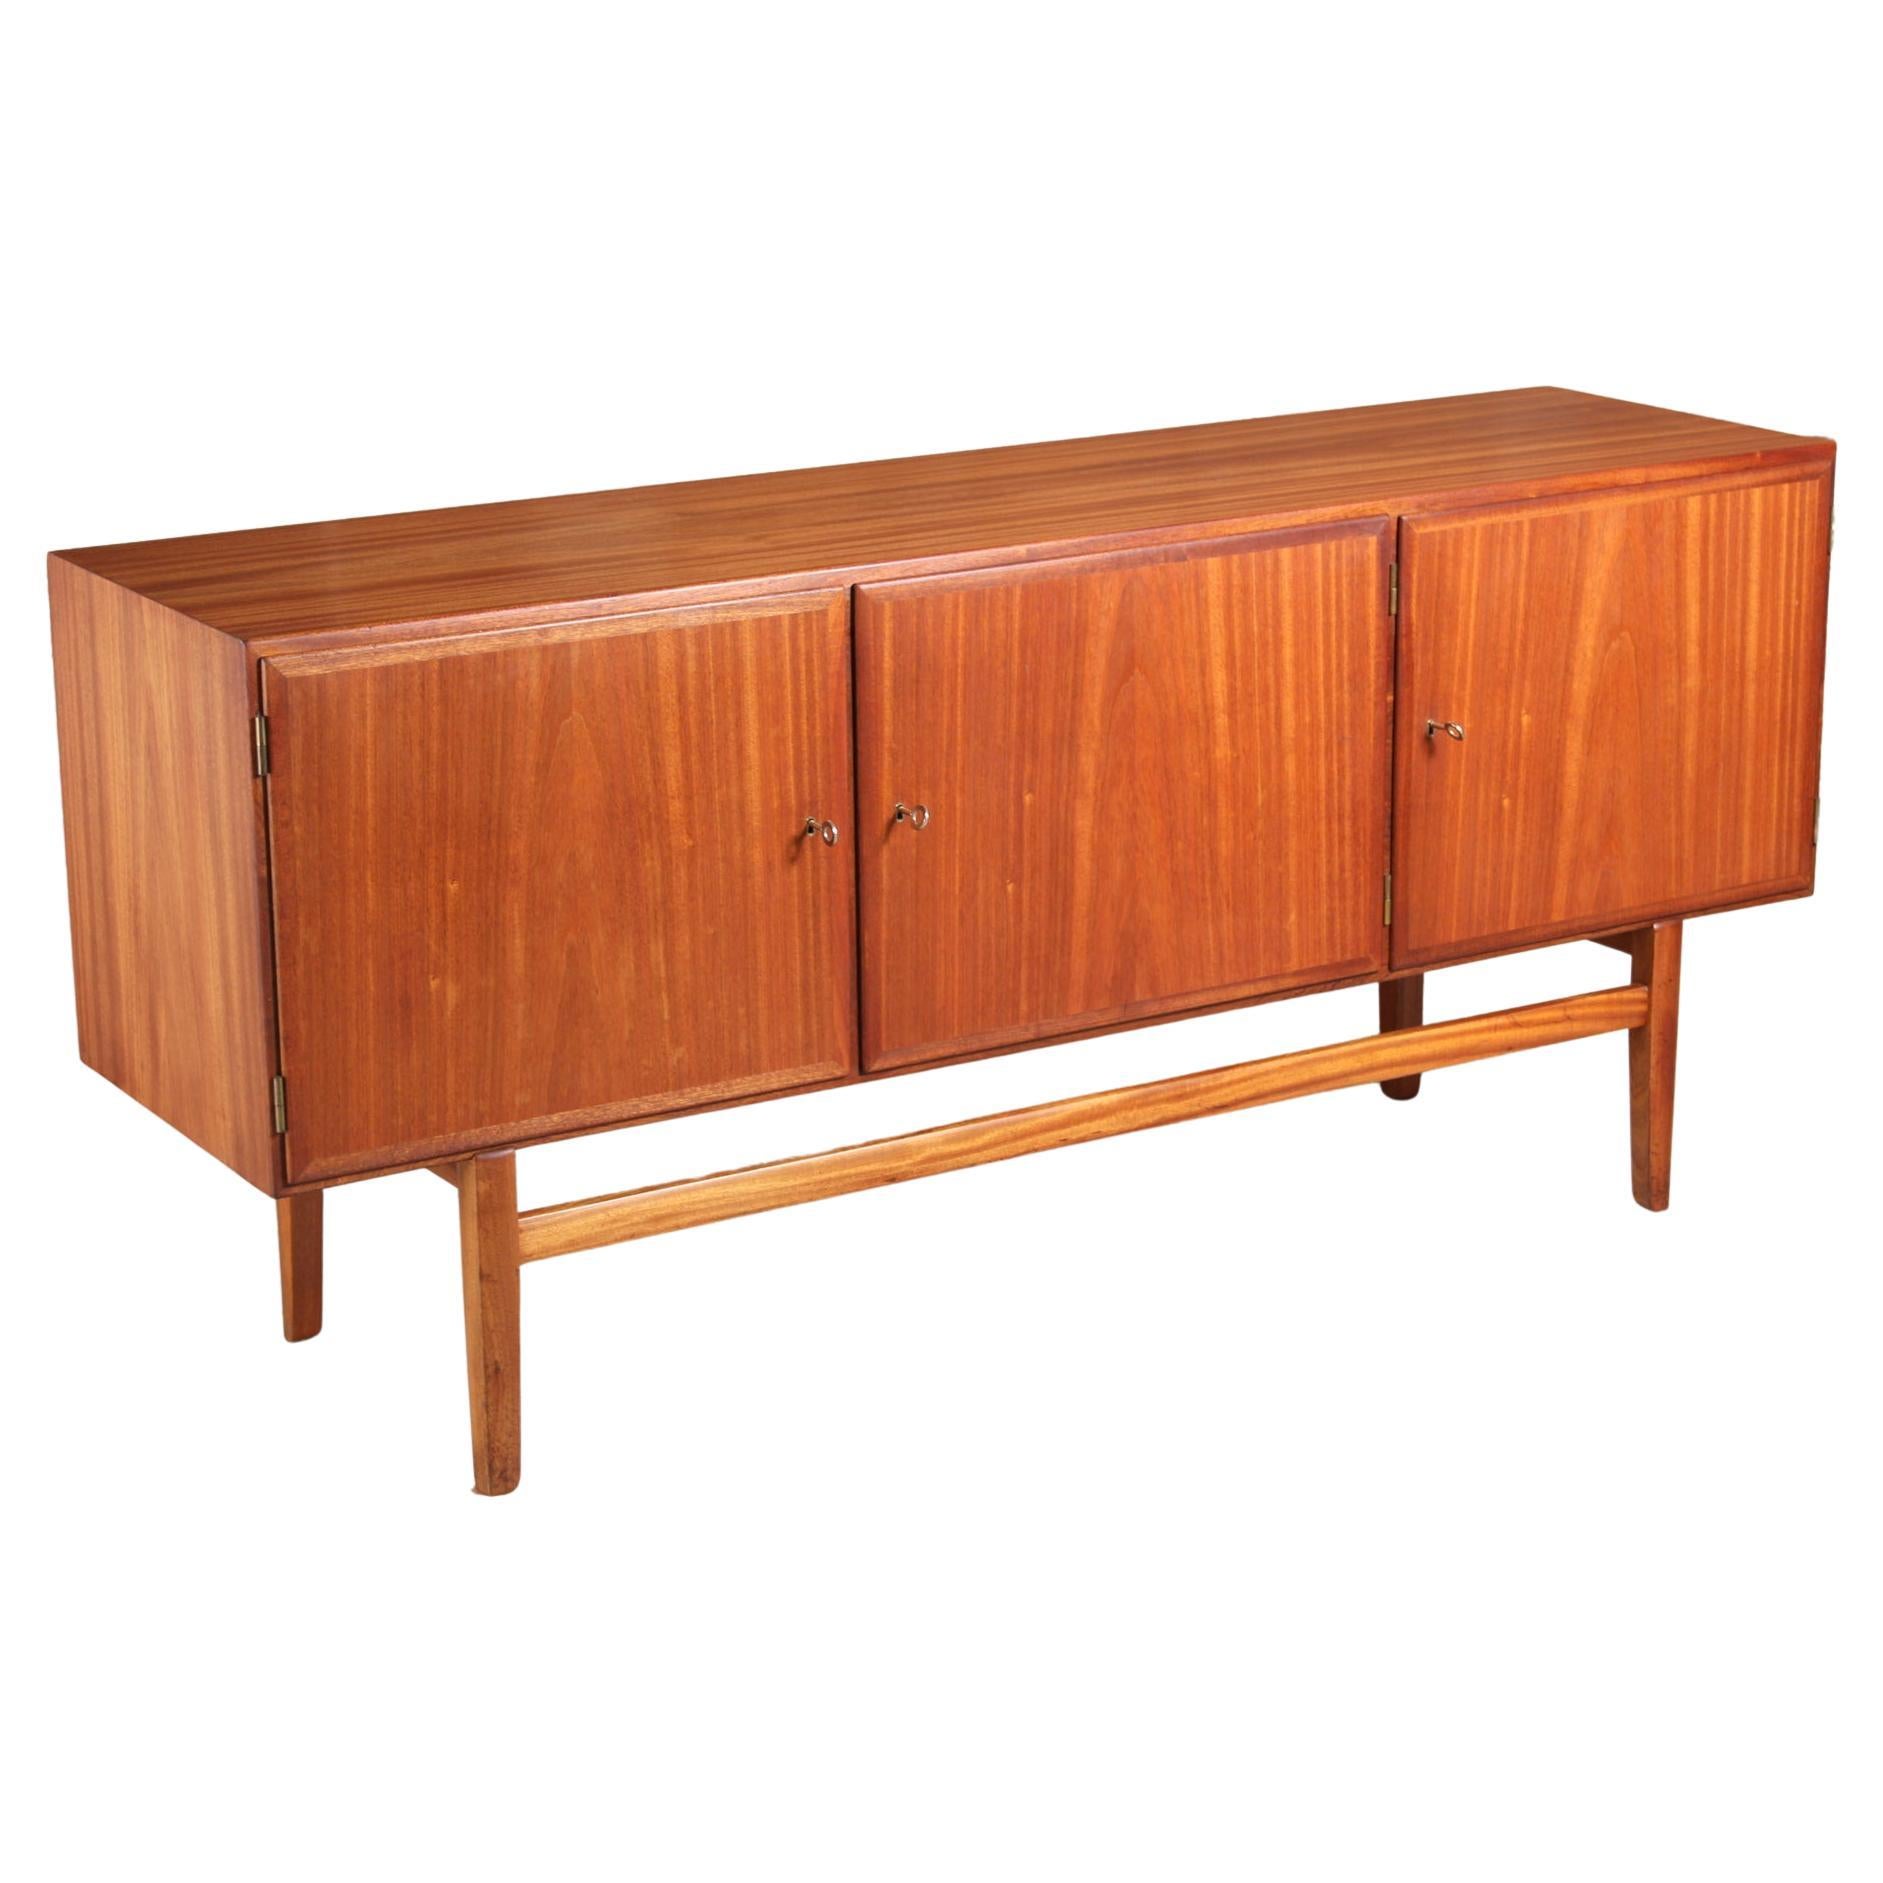 Danish Mid Century Solid Teak Sideboard by Ole Wanscher, Circa 1960s For Sale